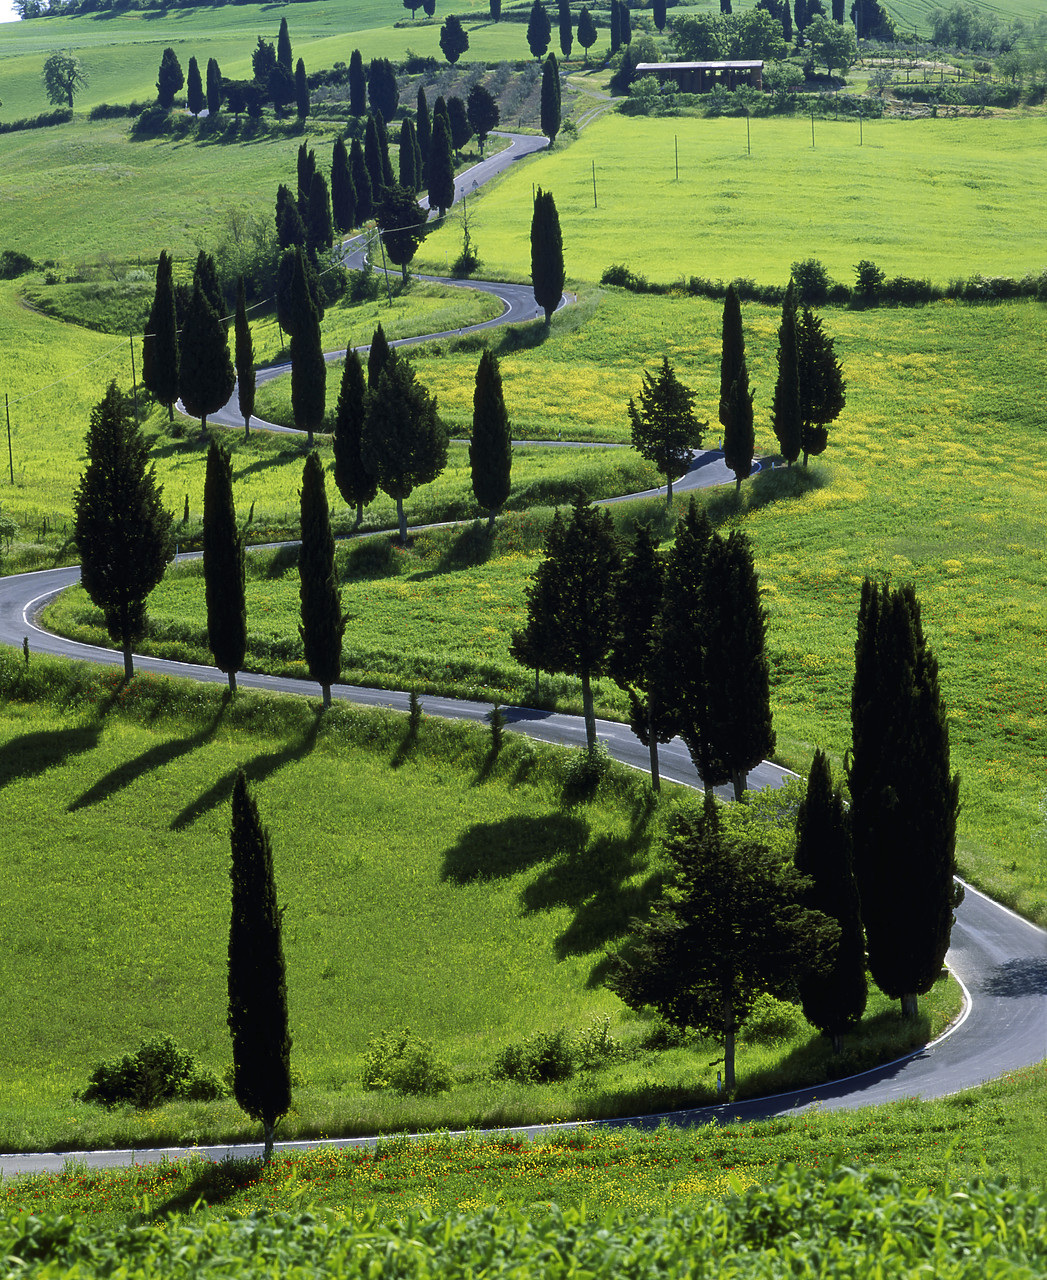 #040093-2 - Winding Road Lined with Cypress Trees, Tuscany, Italy